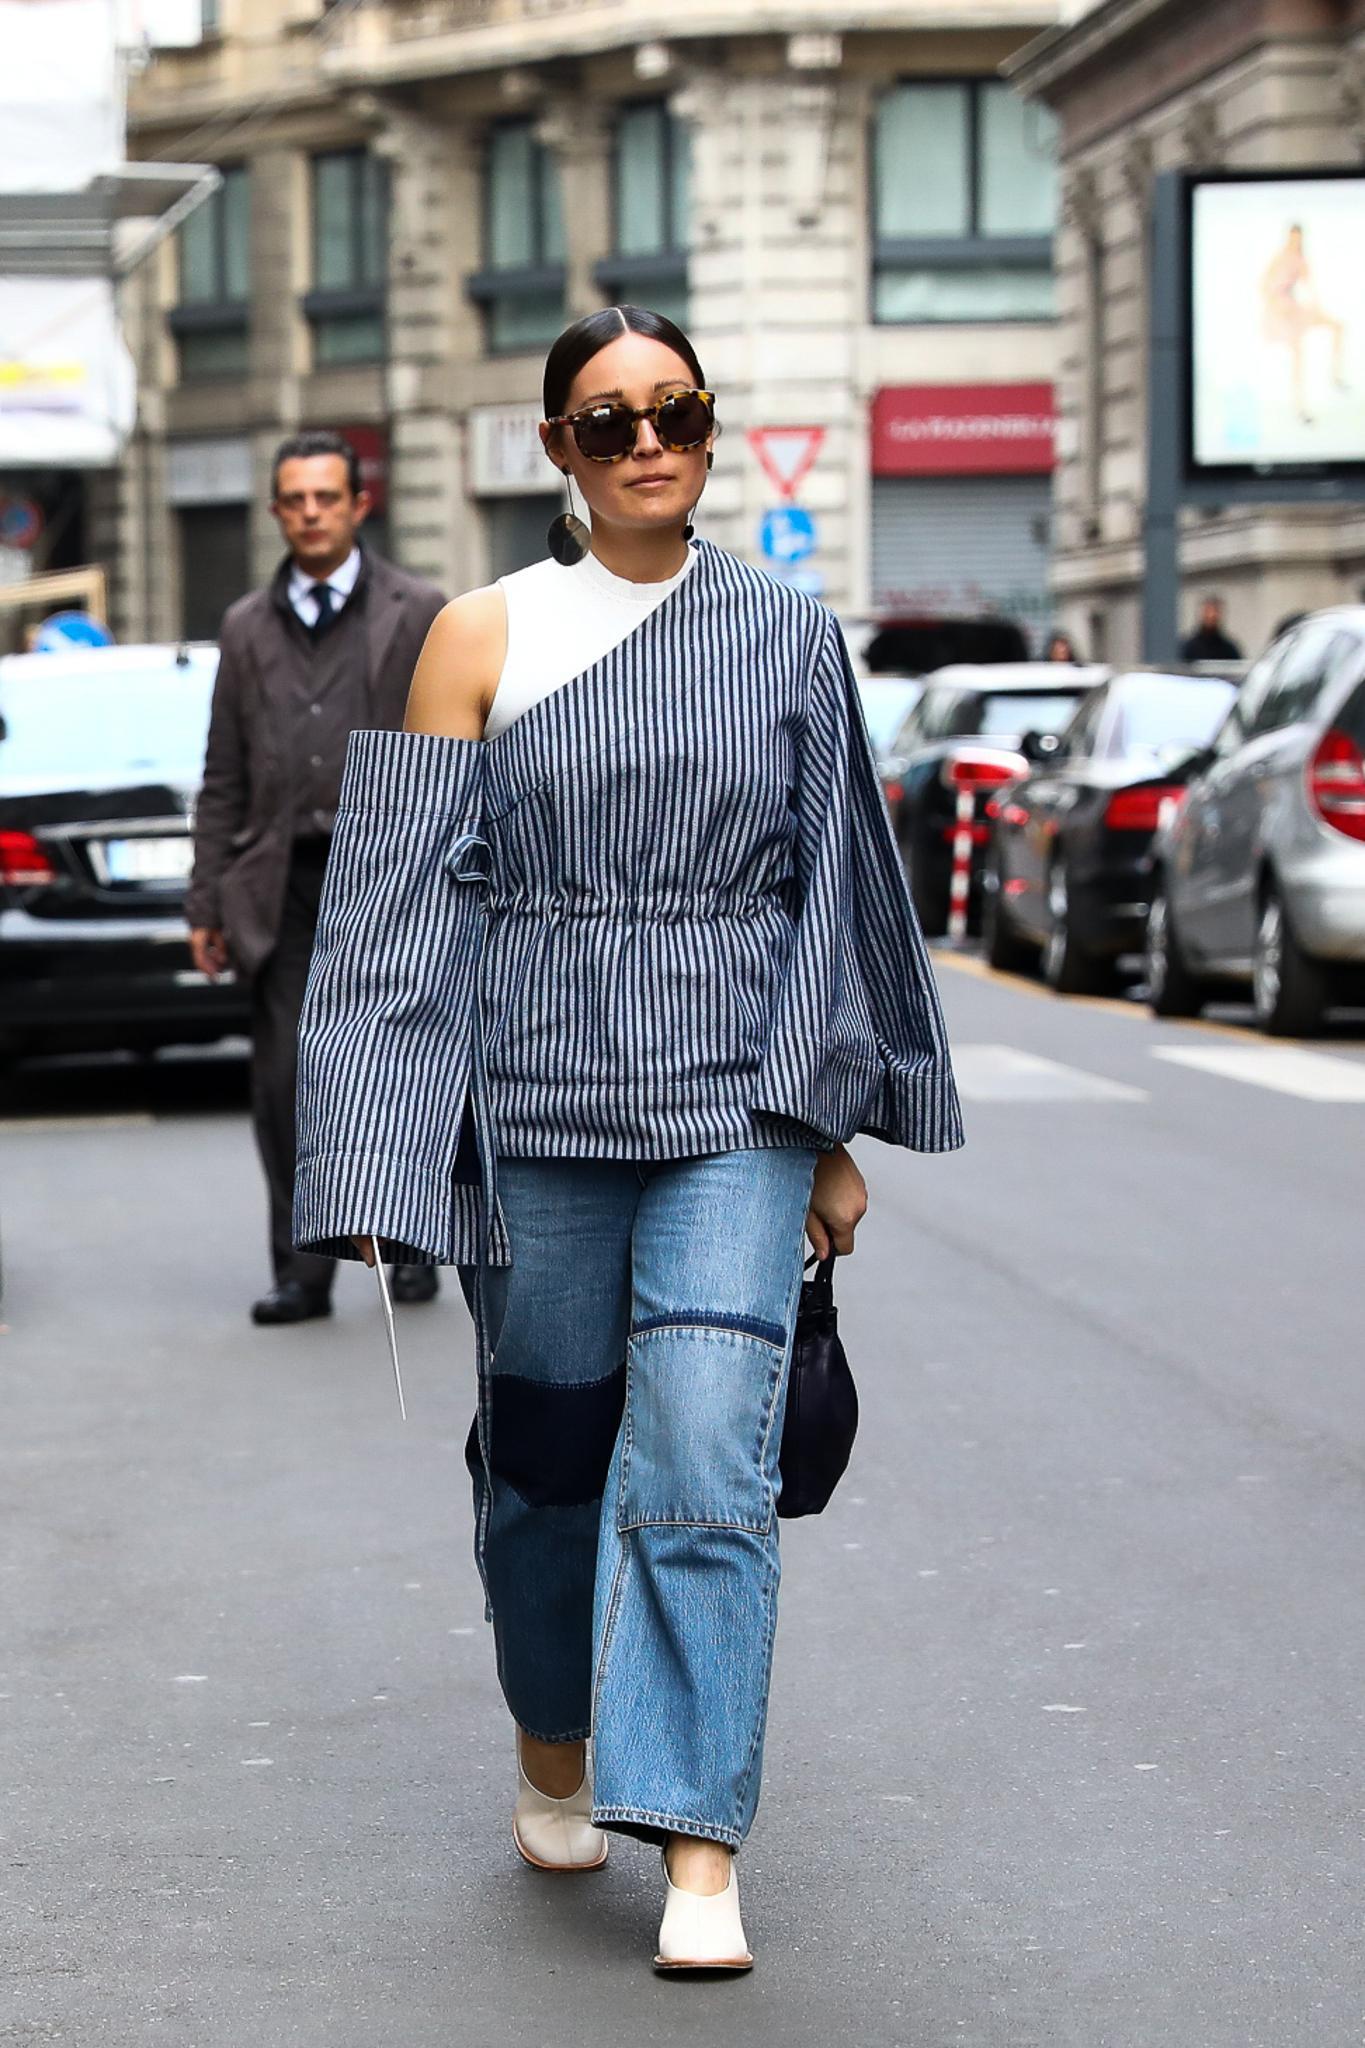 20 Pairs of Jeans That the Oprah Daily Style Team Loves